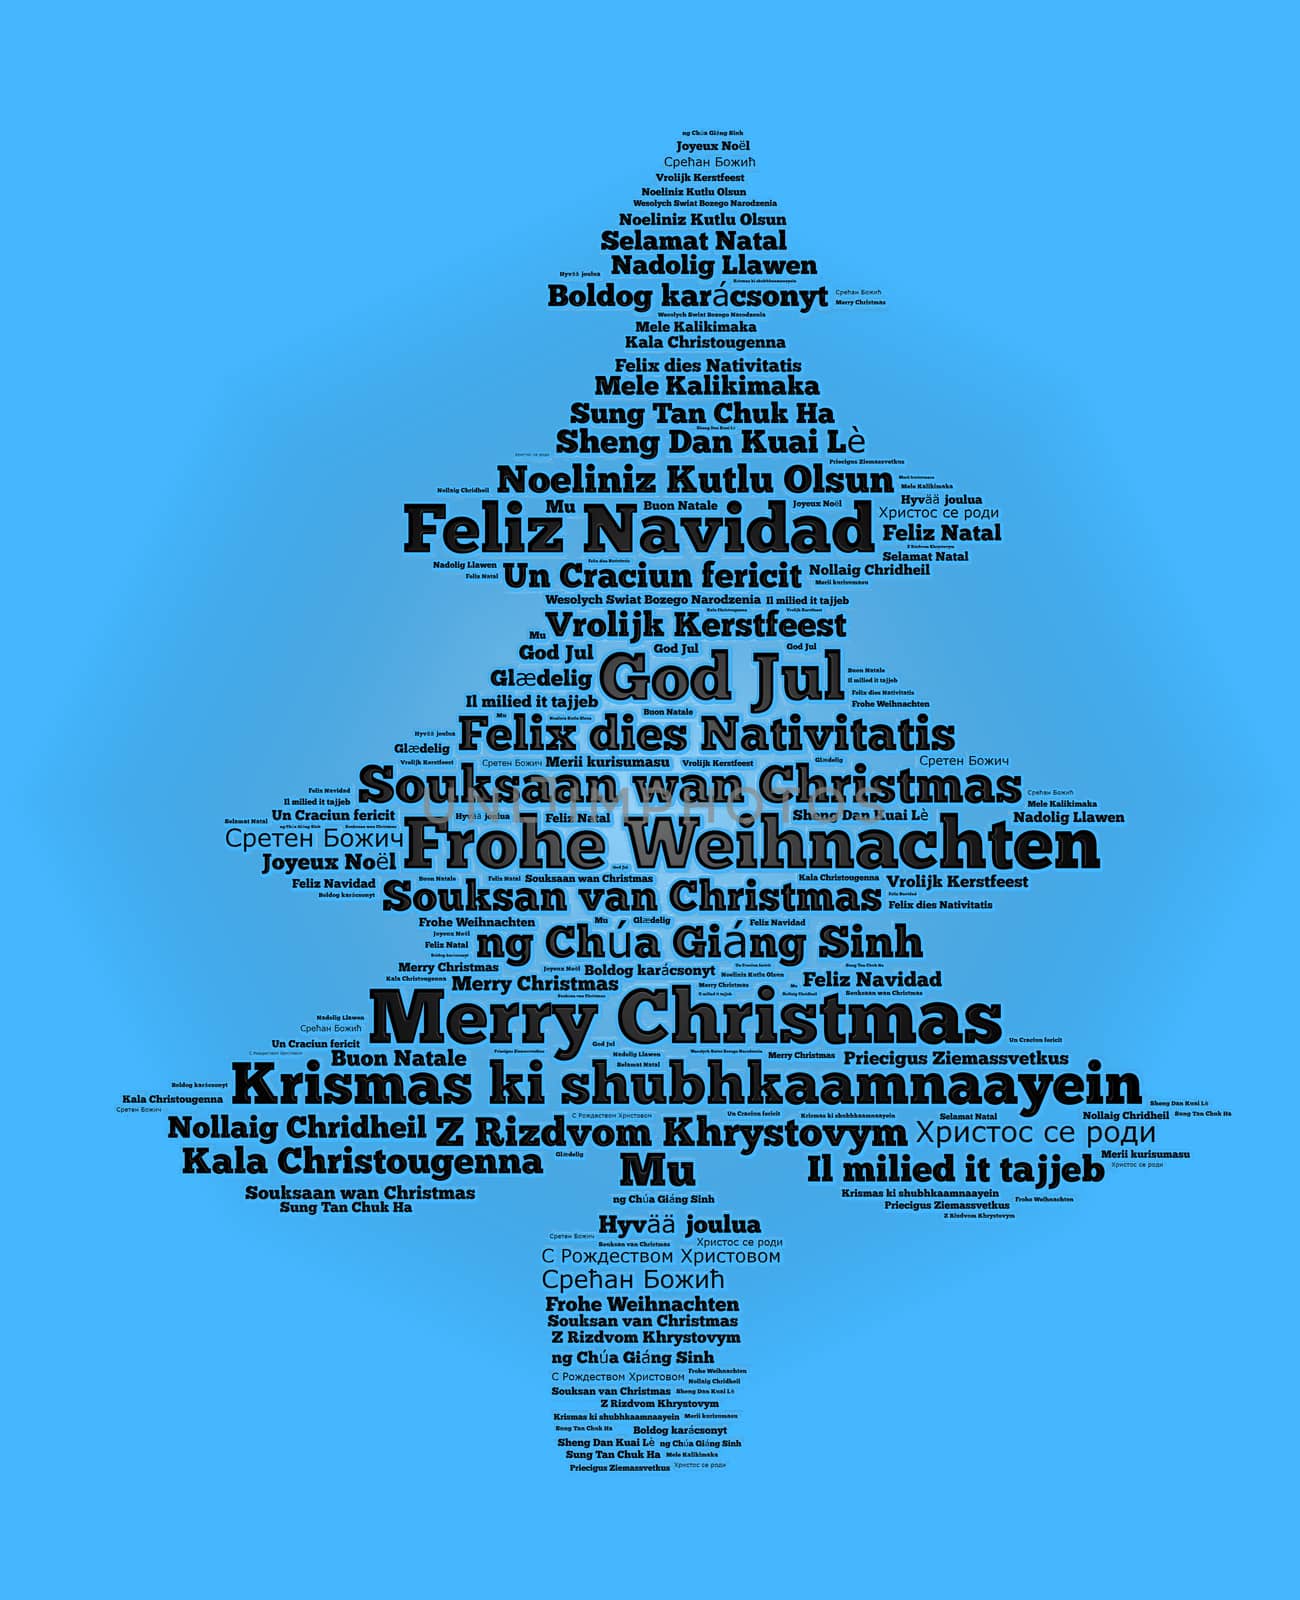 Merry Christmas in different languages by eenevski